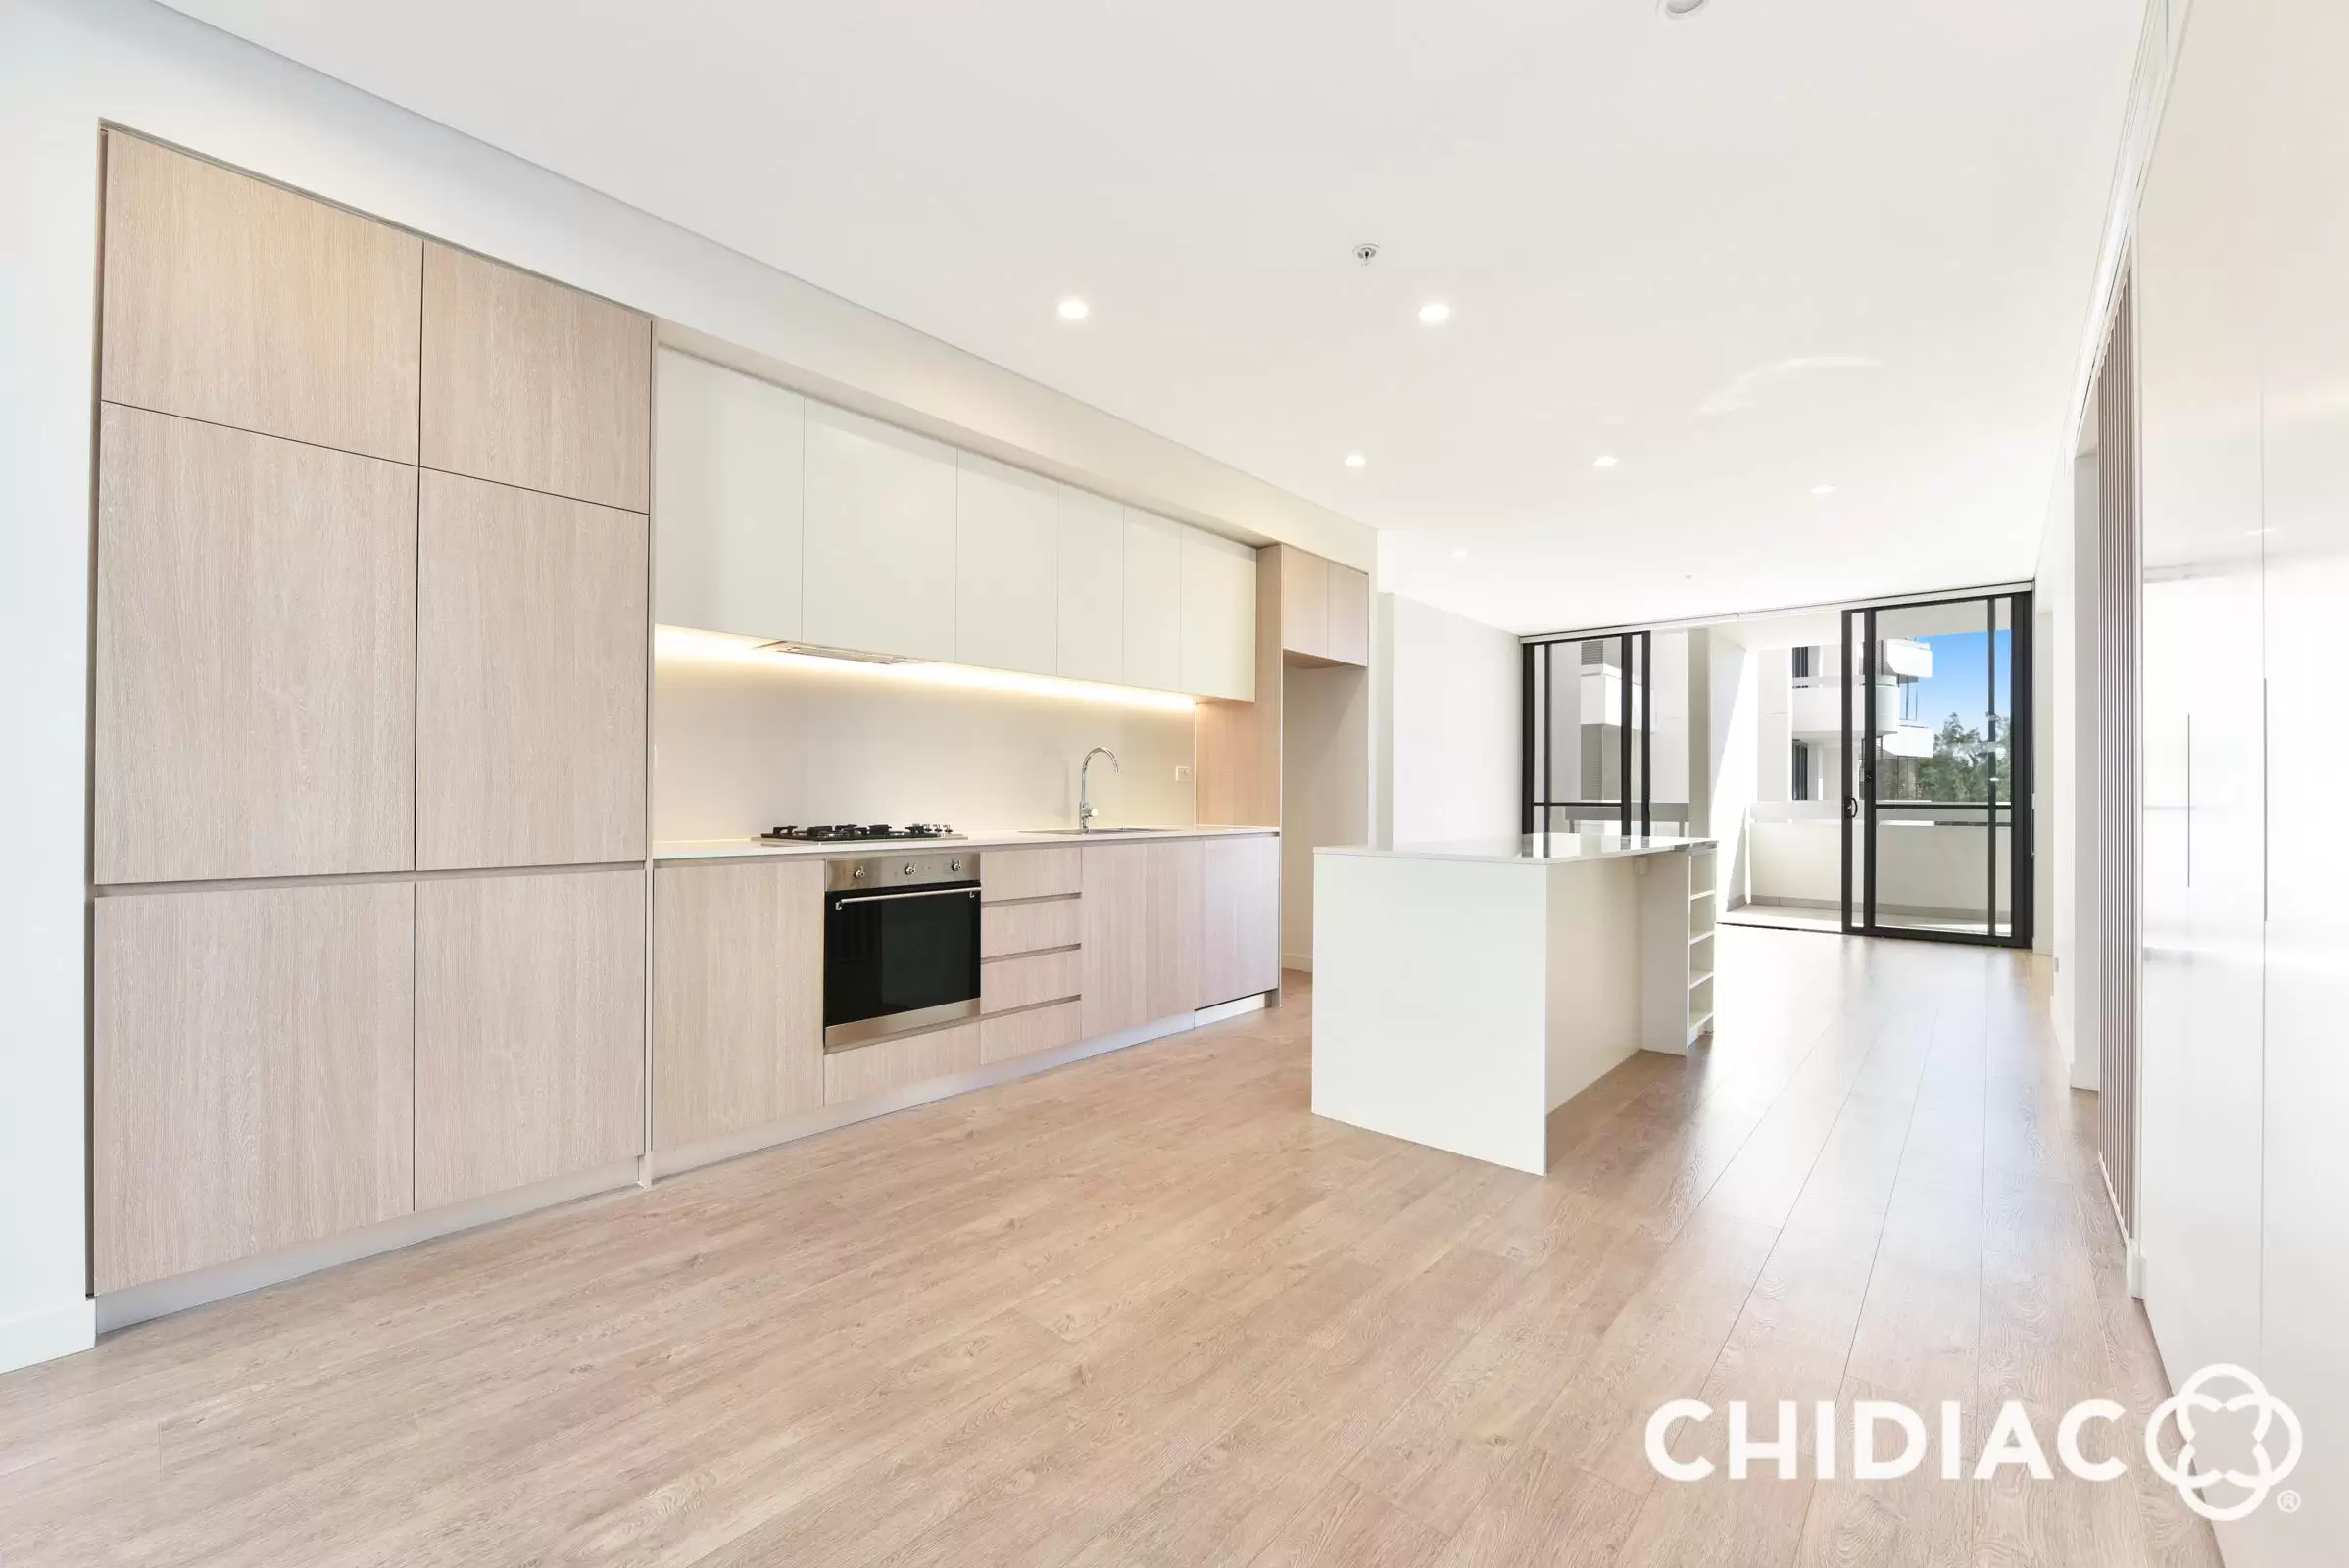 209/2 Kingfisher Street, Lidcombe Leased by Chidiac Realty - image 2